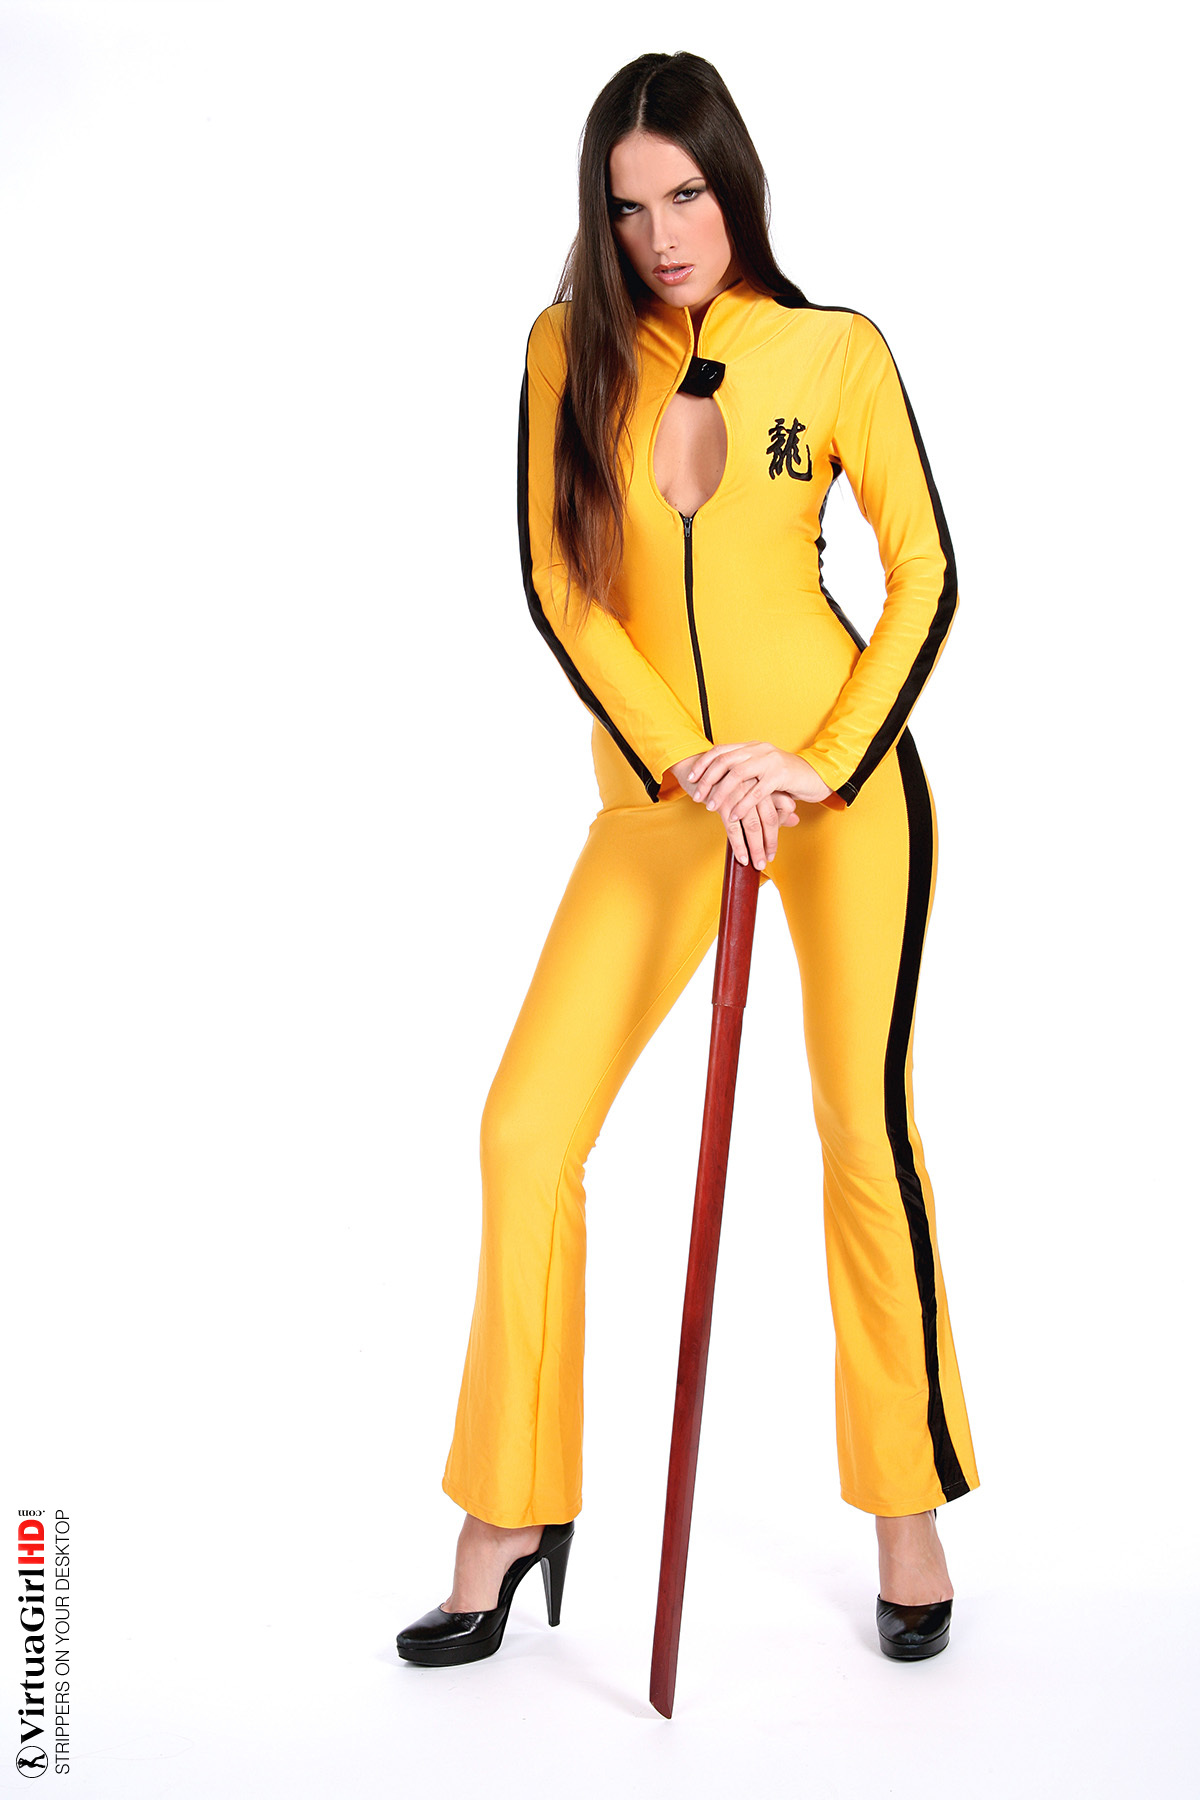 Long Hair Brunette Stripping In A Kill Bill Outfit